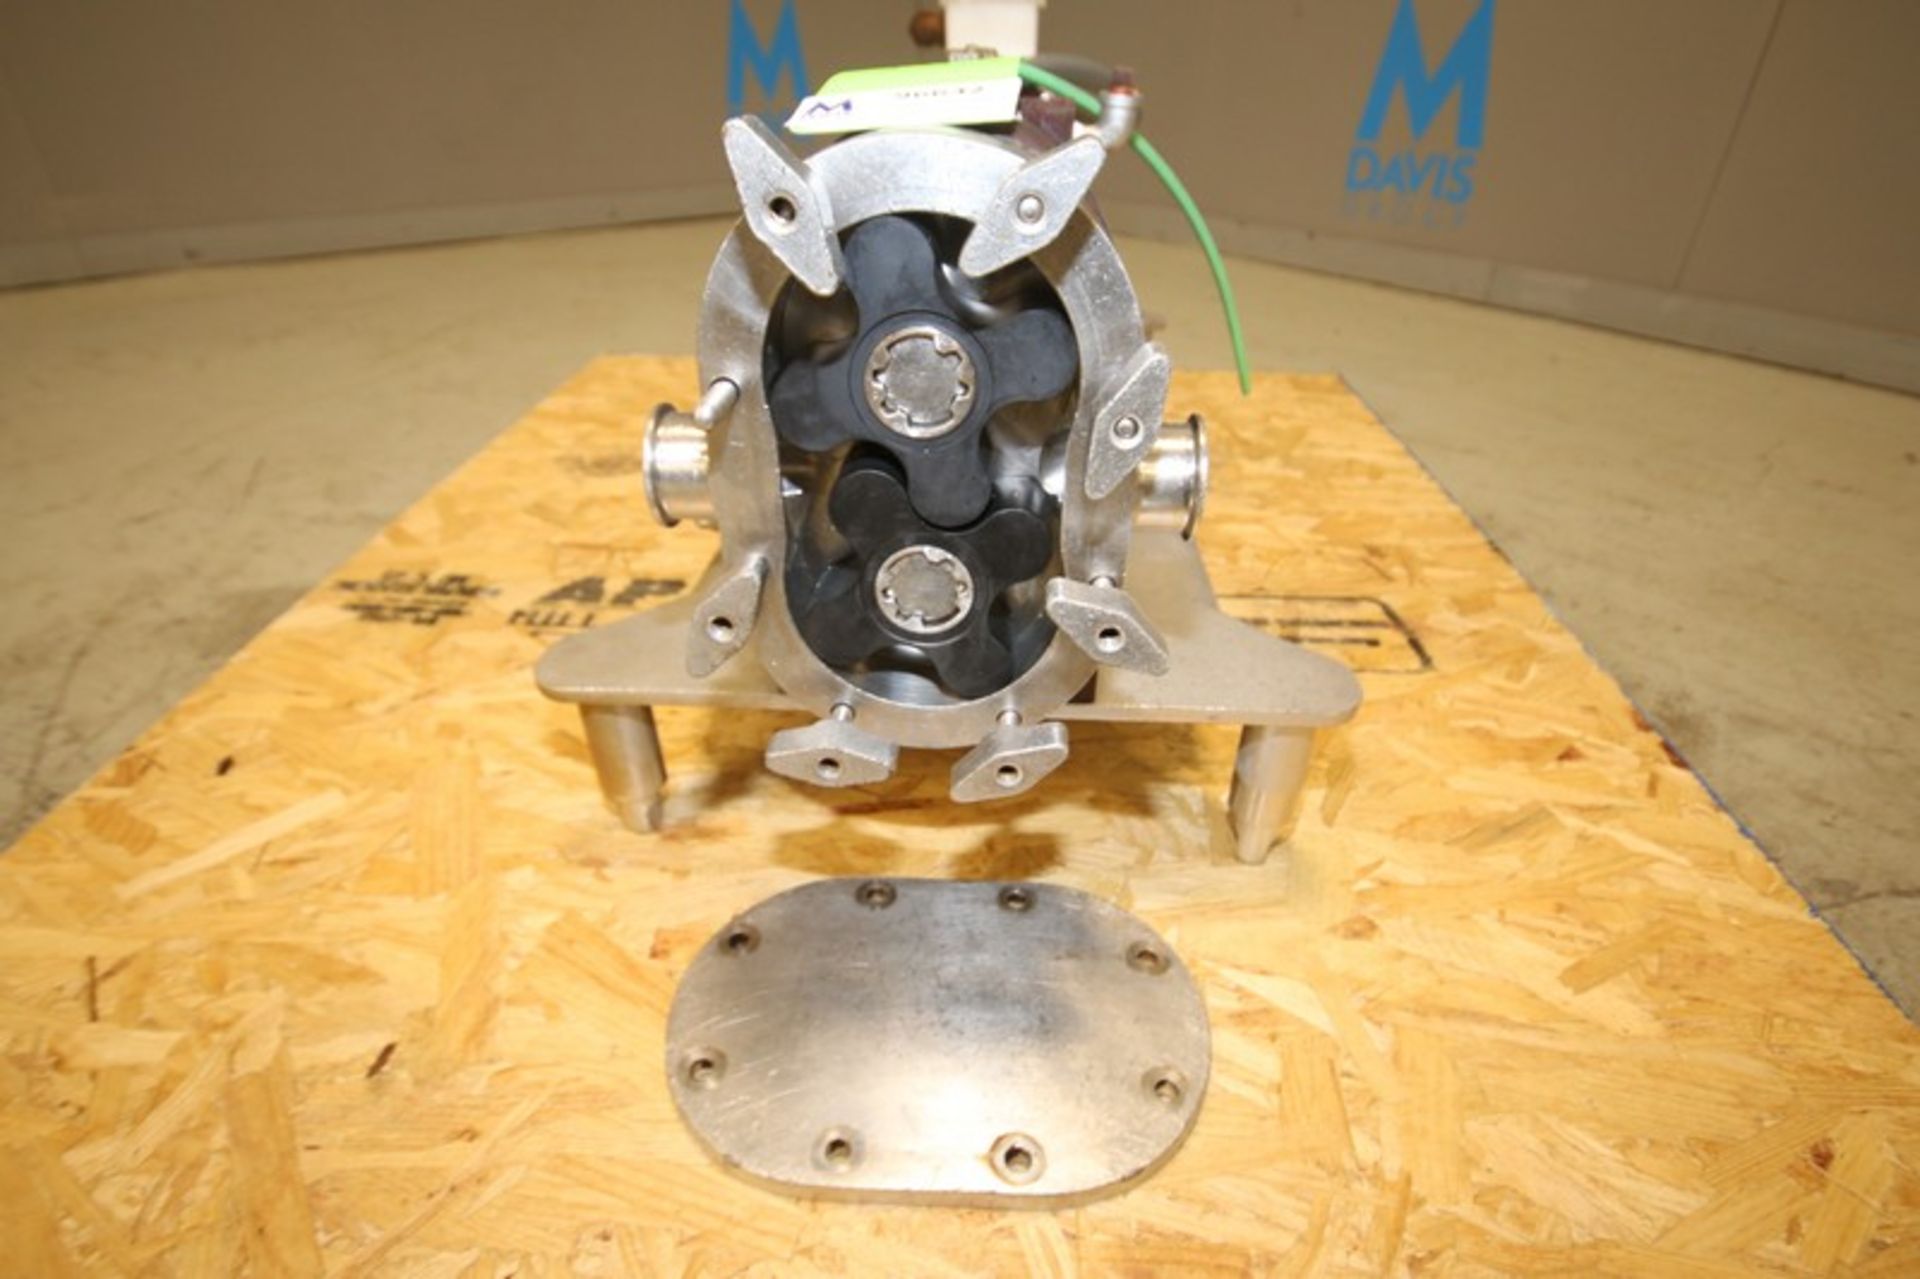 Tri Clover Positive Displacement Pump, Model PR25-1 1/2M-UC4-ST-S, S/N X3883, with 1 1/2" CT Head - Image 2 of 5